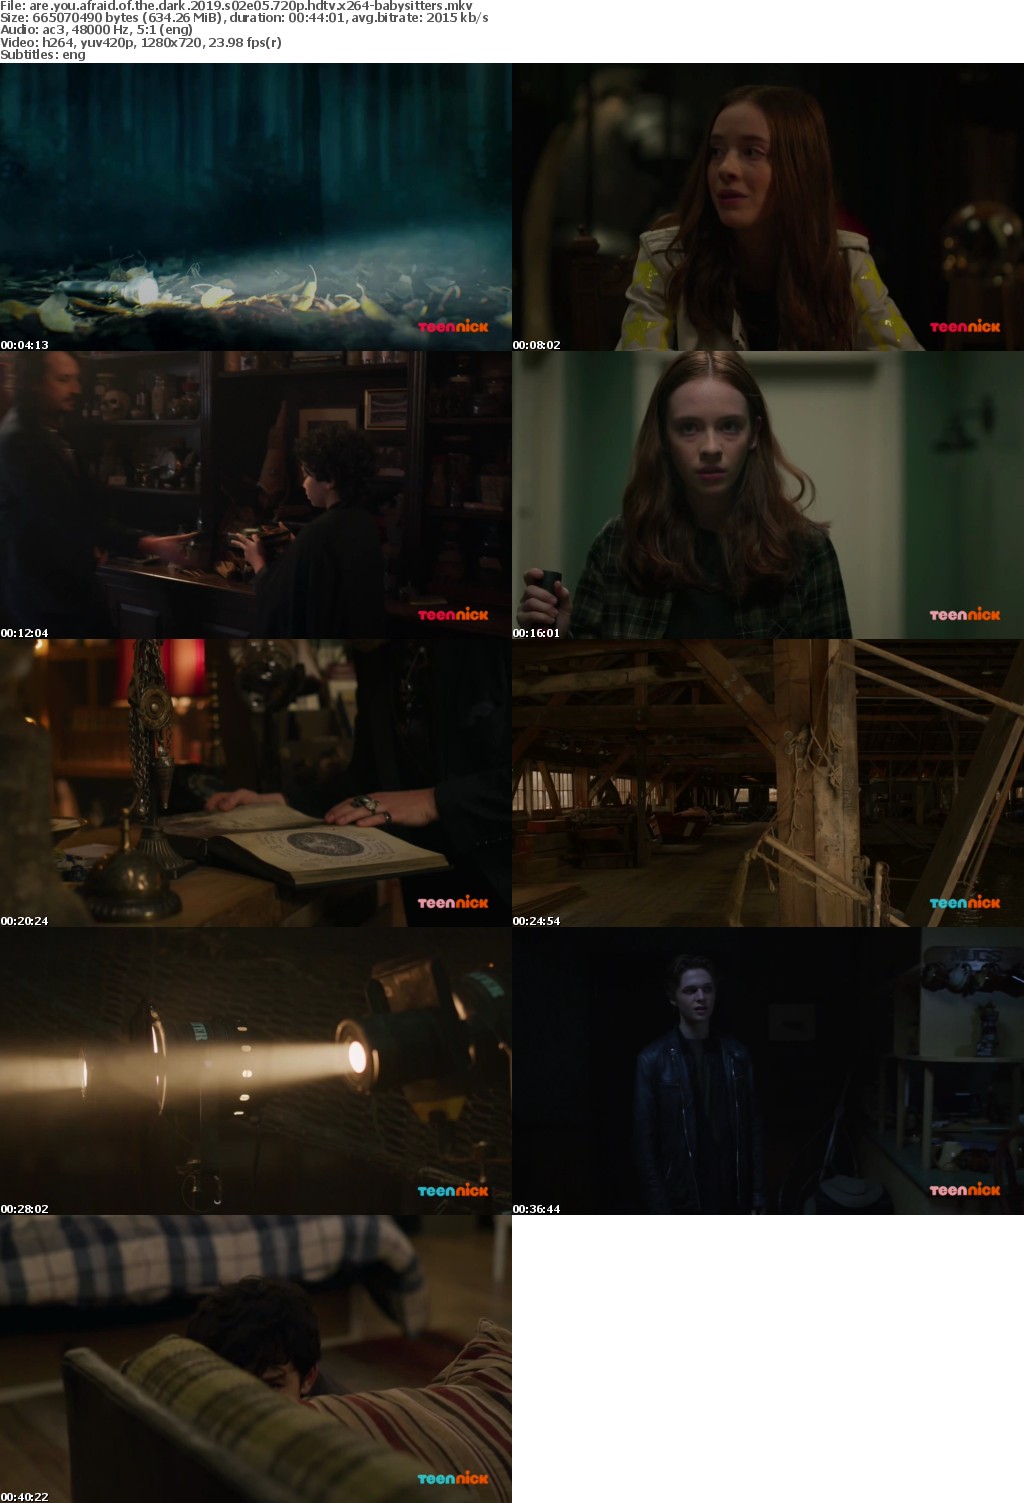 Are You Afraid of the Dark 2019 S02E05 720p HDTV x264-BABYSITTERS